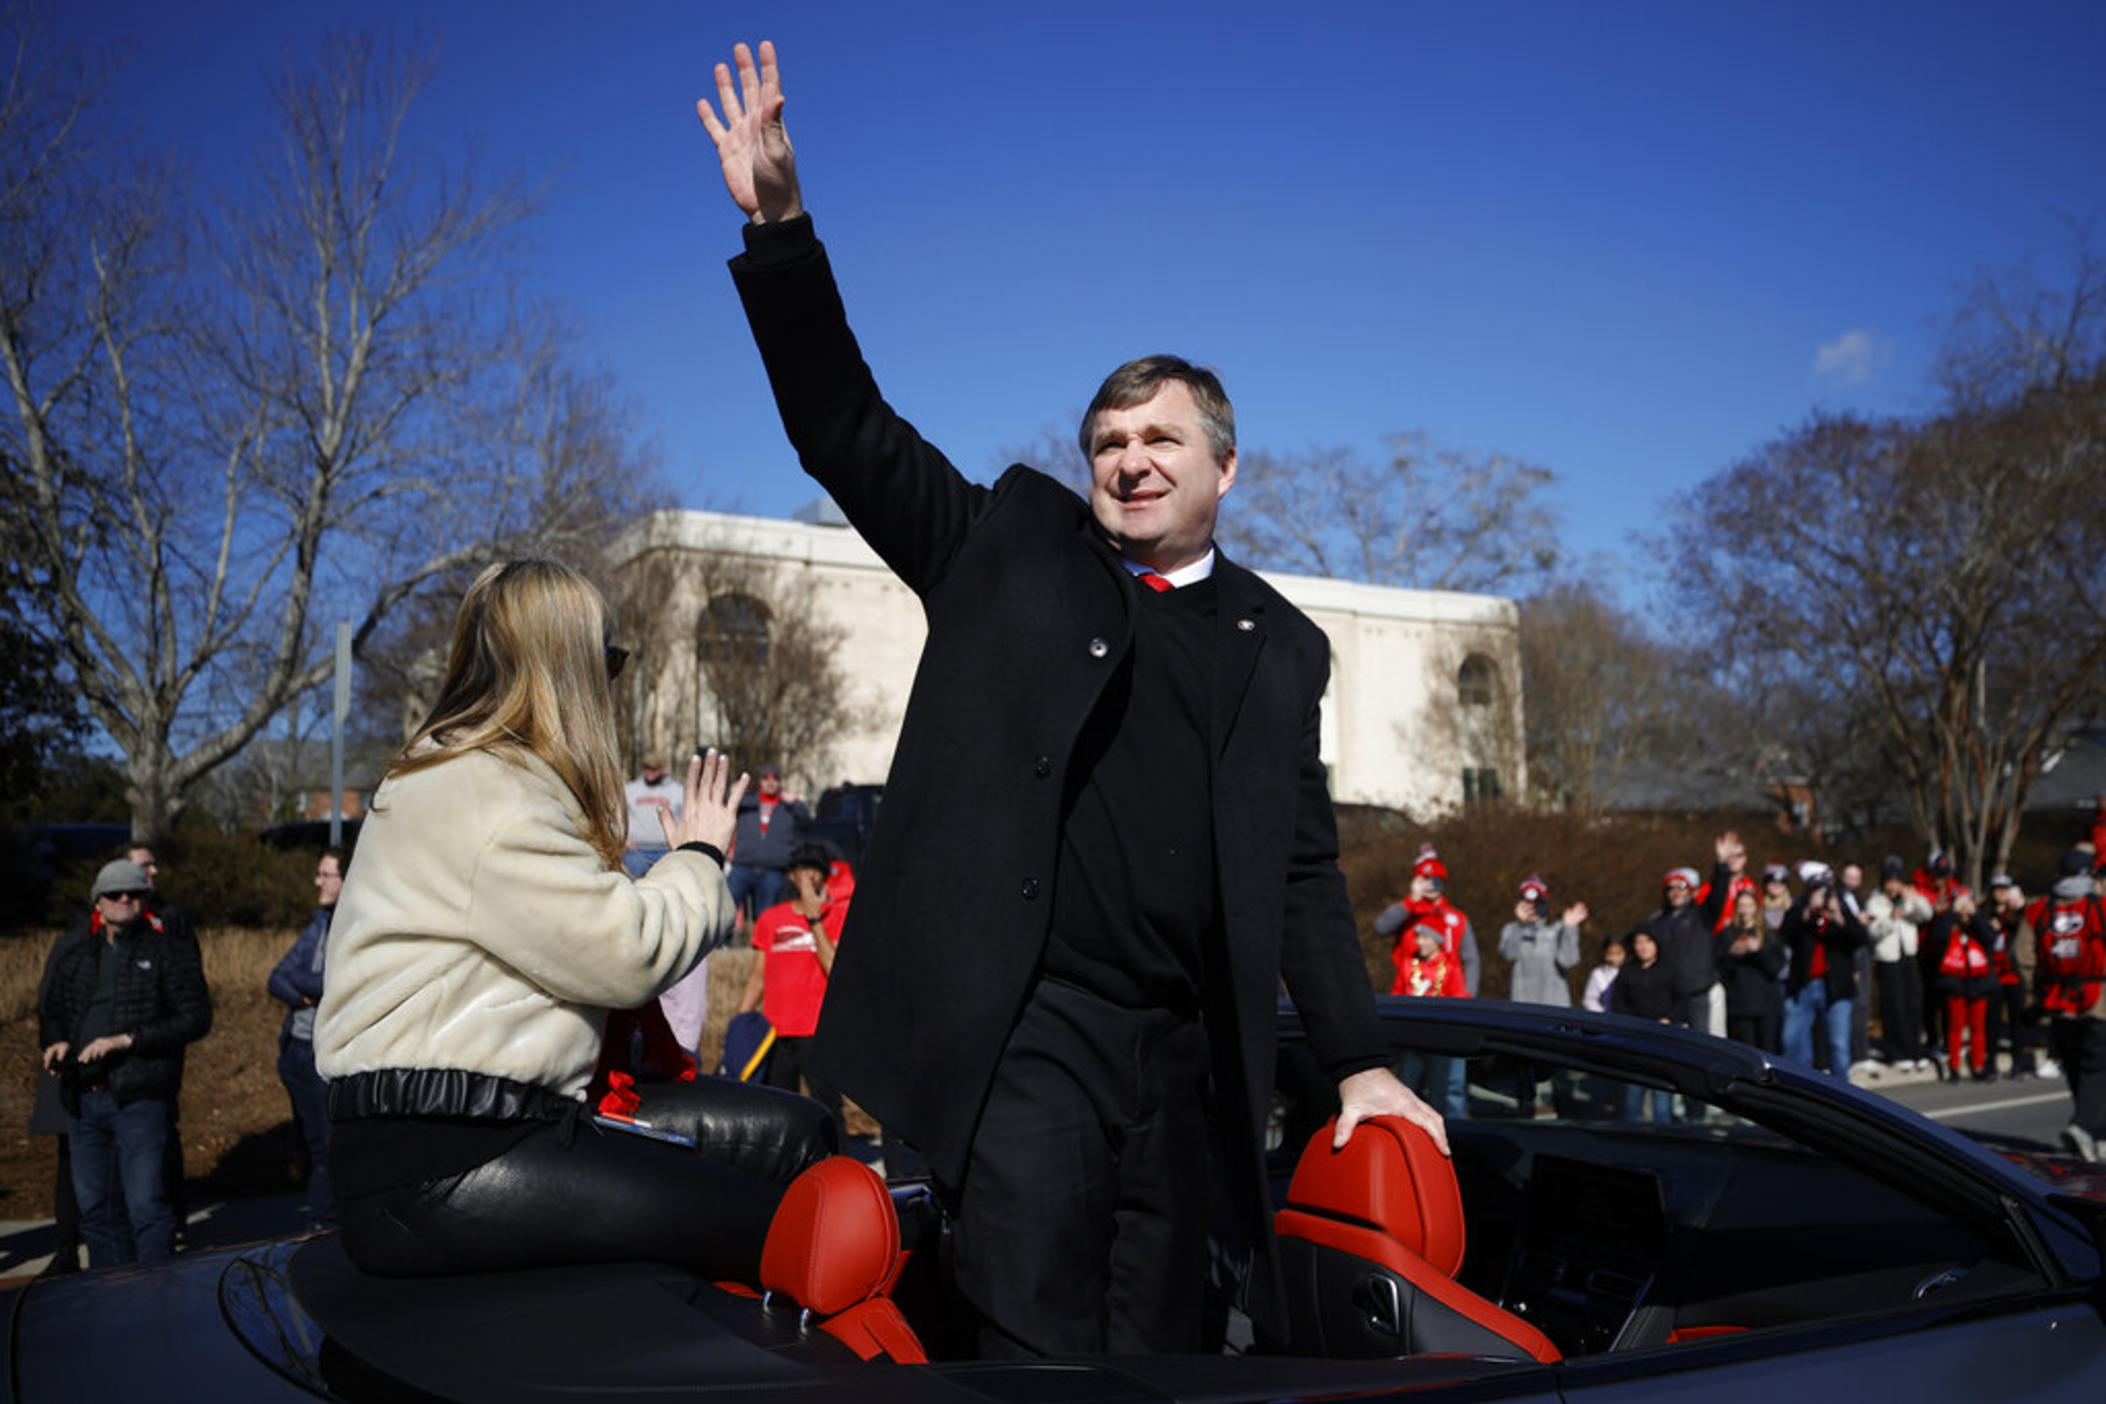 Georgia head coach Kirby Smart waves at fans during a parade celebrating the Bulldog's second consecutive NCAA college football national championship, Saturday, Jan. 14, 2023, in Athens, Ga.